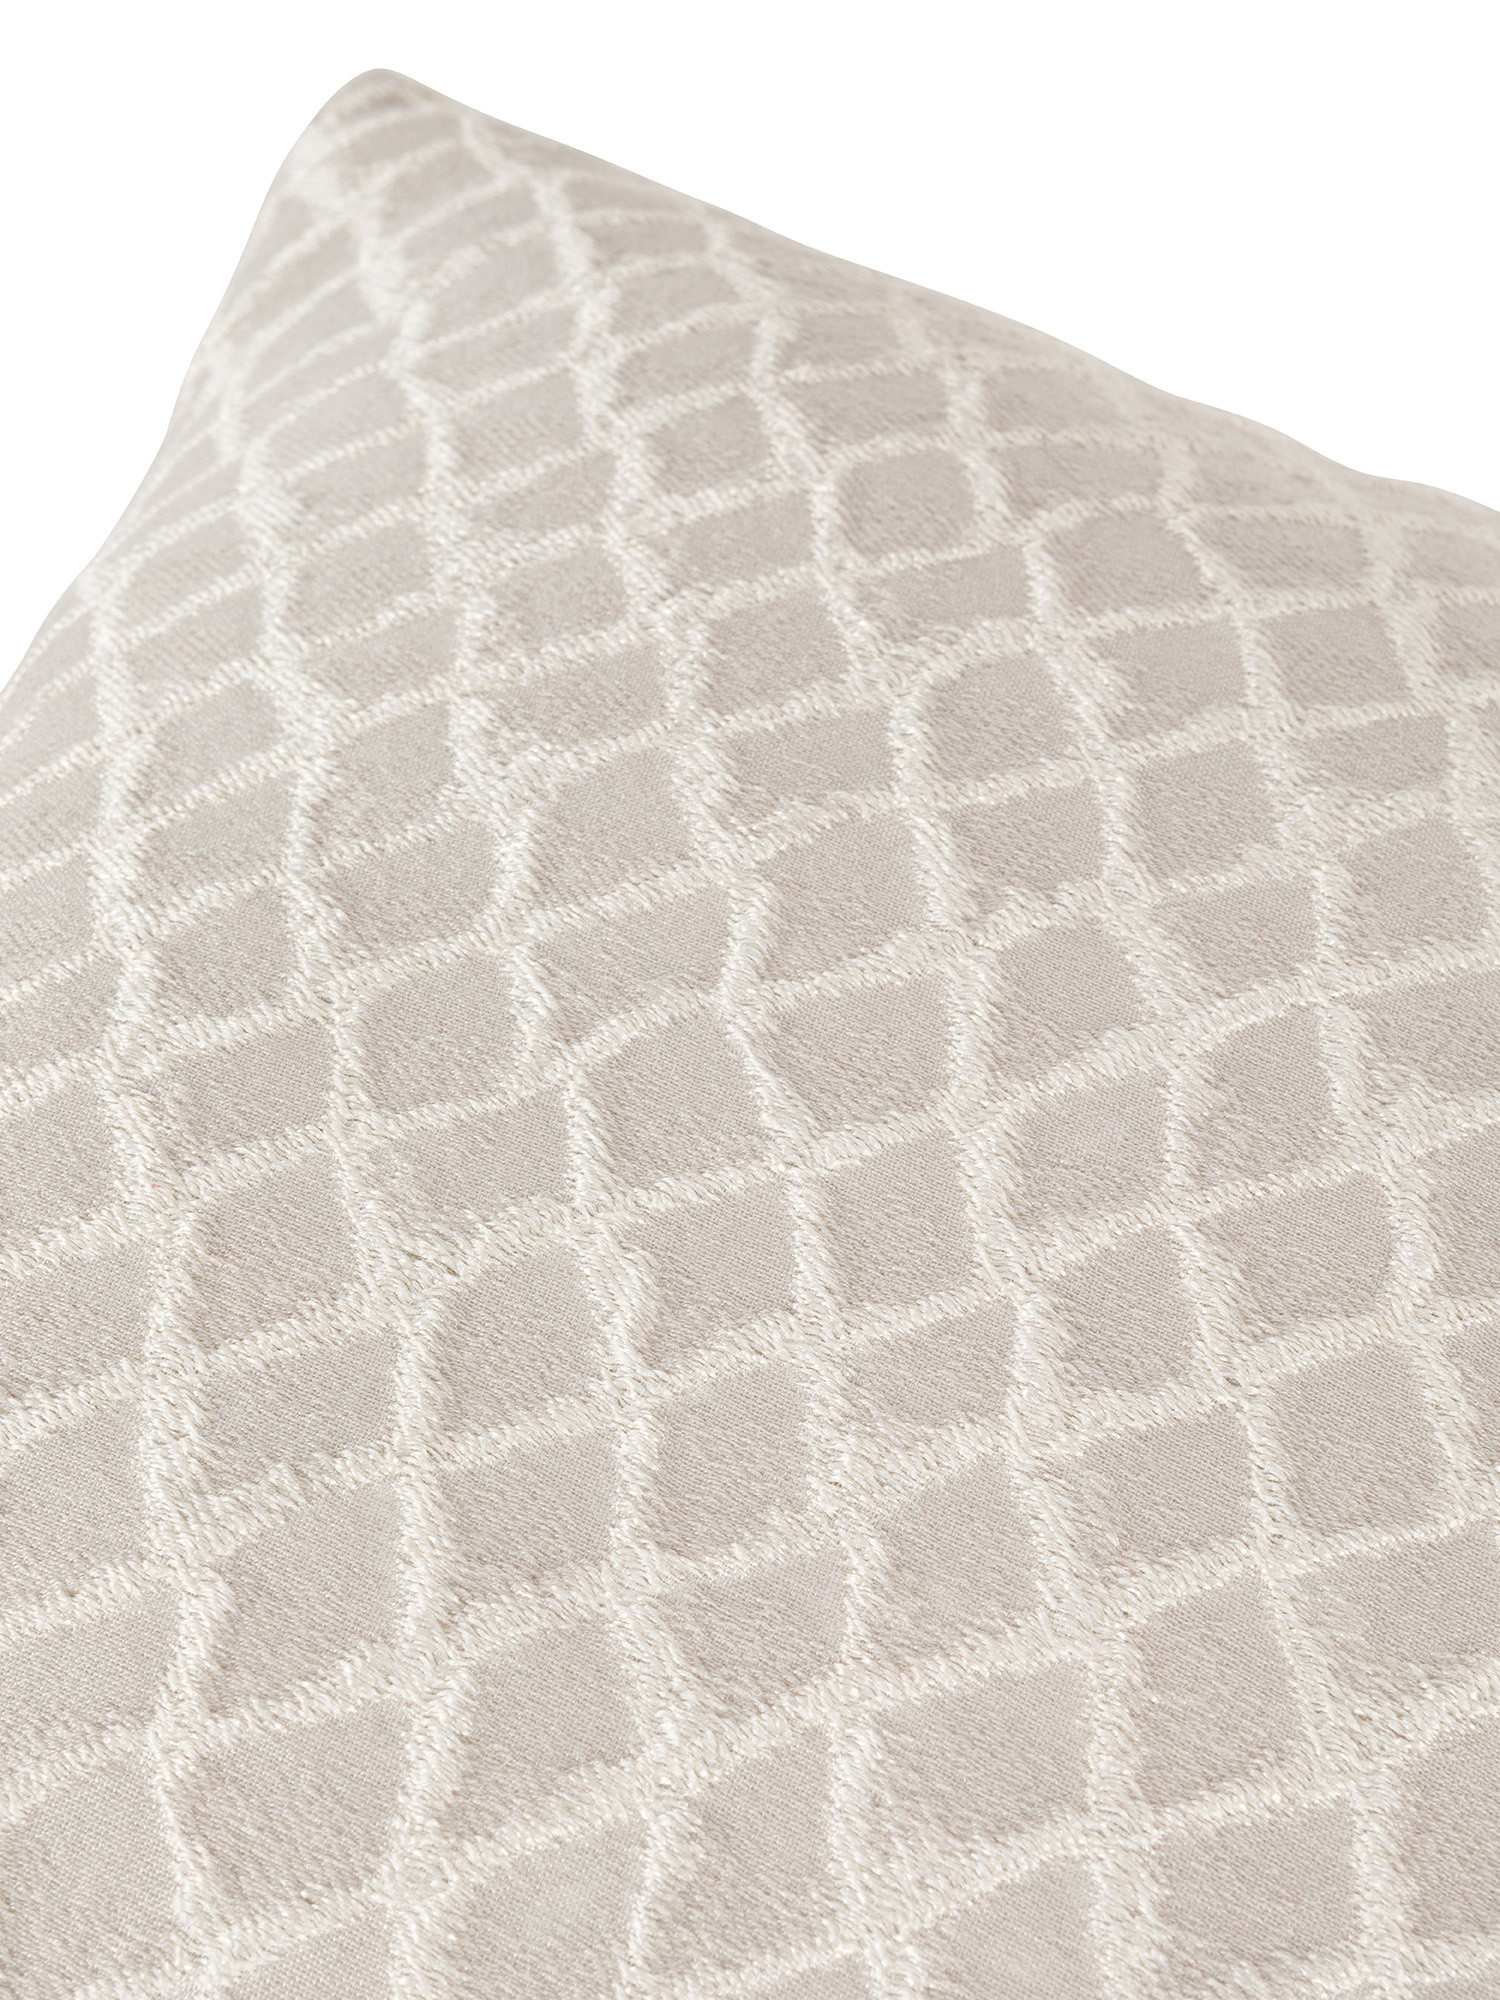 Cushion in jacquard fabric with geometric pattern 45x45 cm, Silver Grey, large image number 2